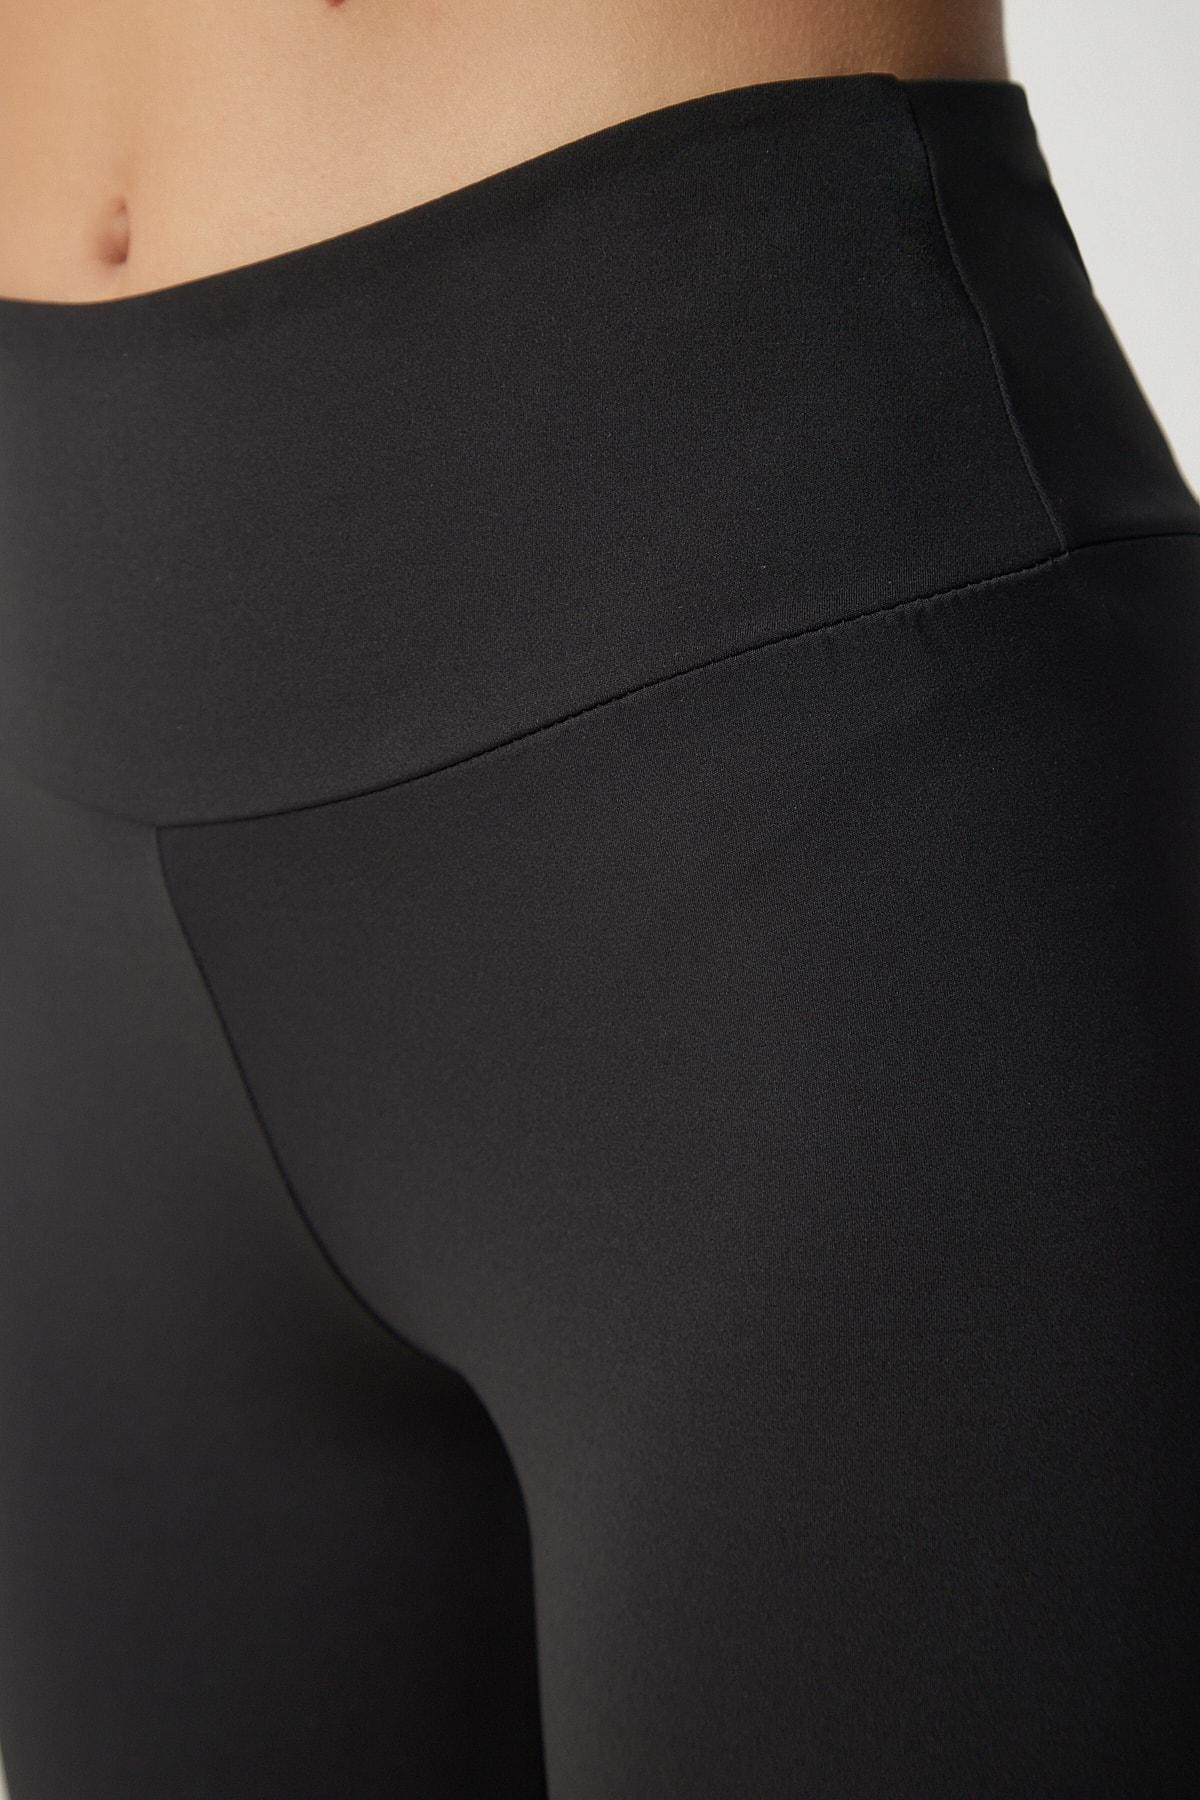 Happiness Istanbul - Black High Waist Consolidating Sports Shorts Leggings